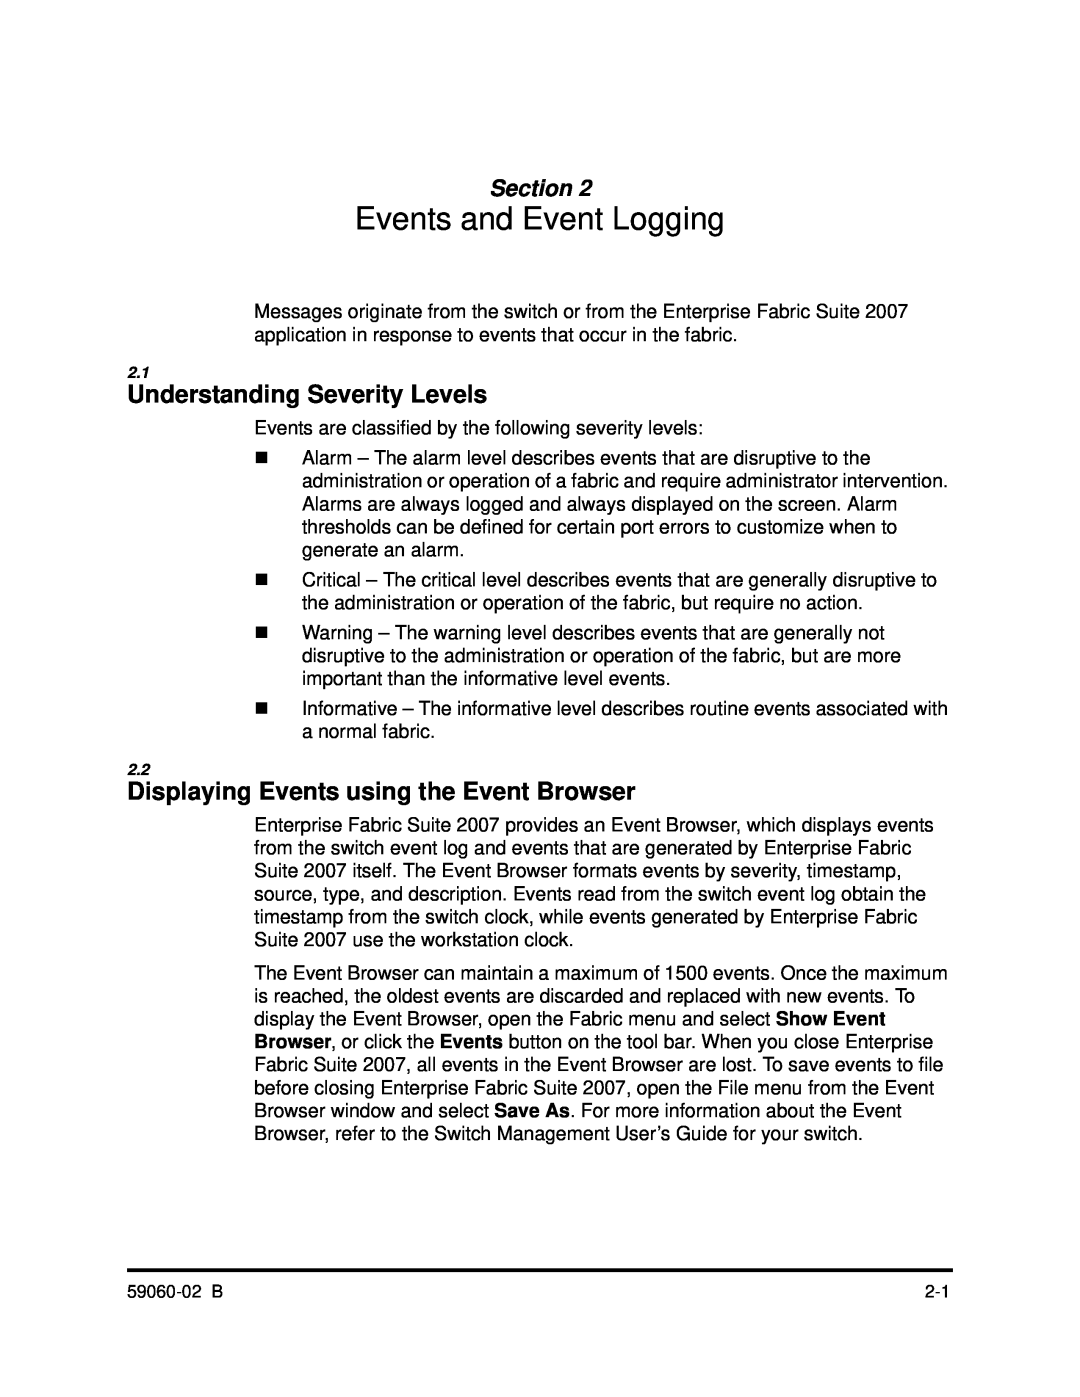 Q-Logic 59060-02 B Events and Event Logging, Understanding Severity Levels, Displaying Events using the Event Browser 